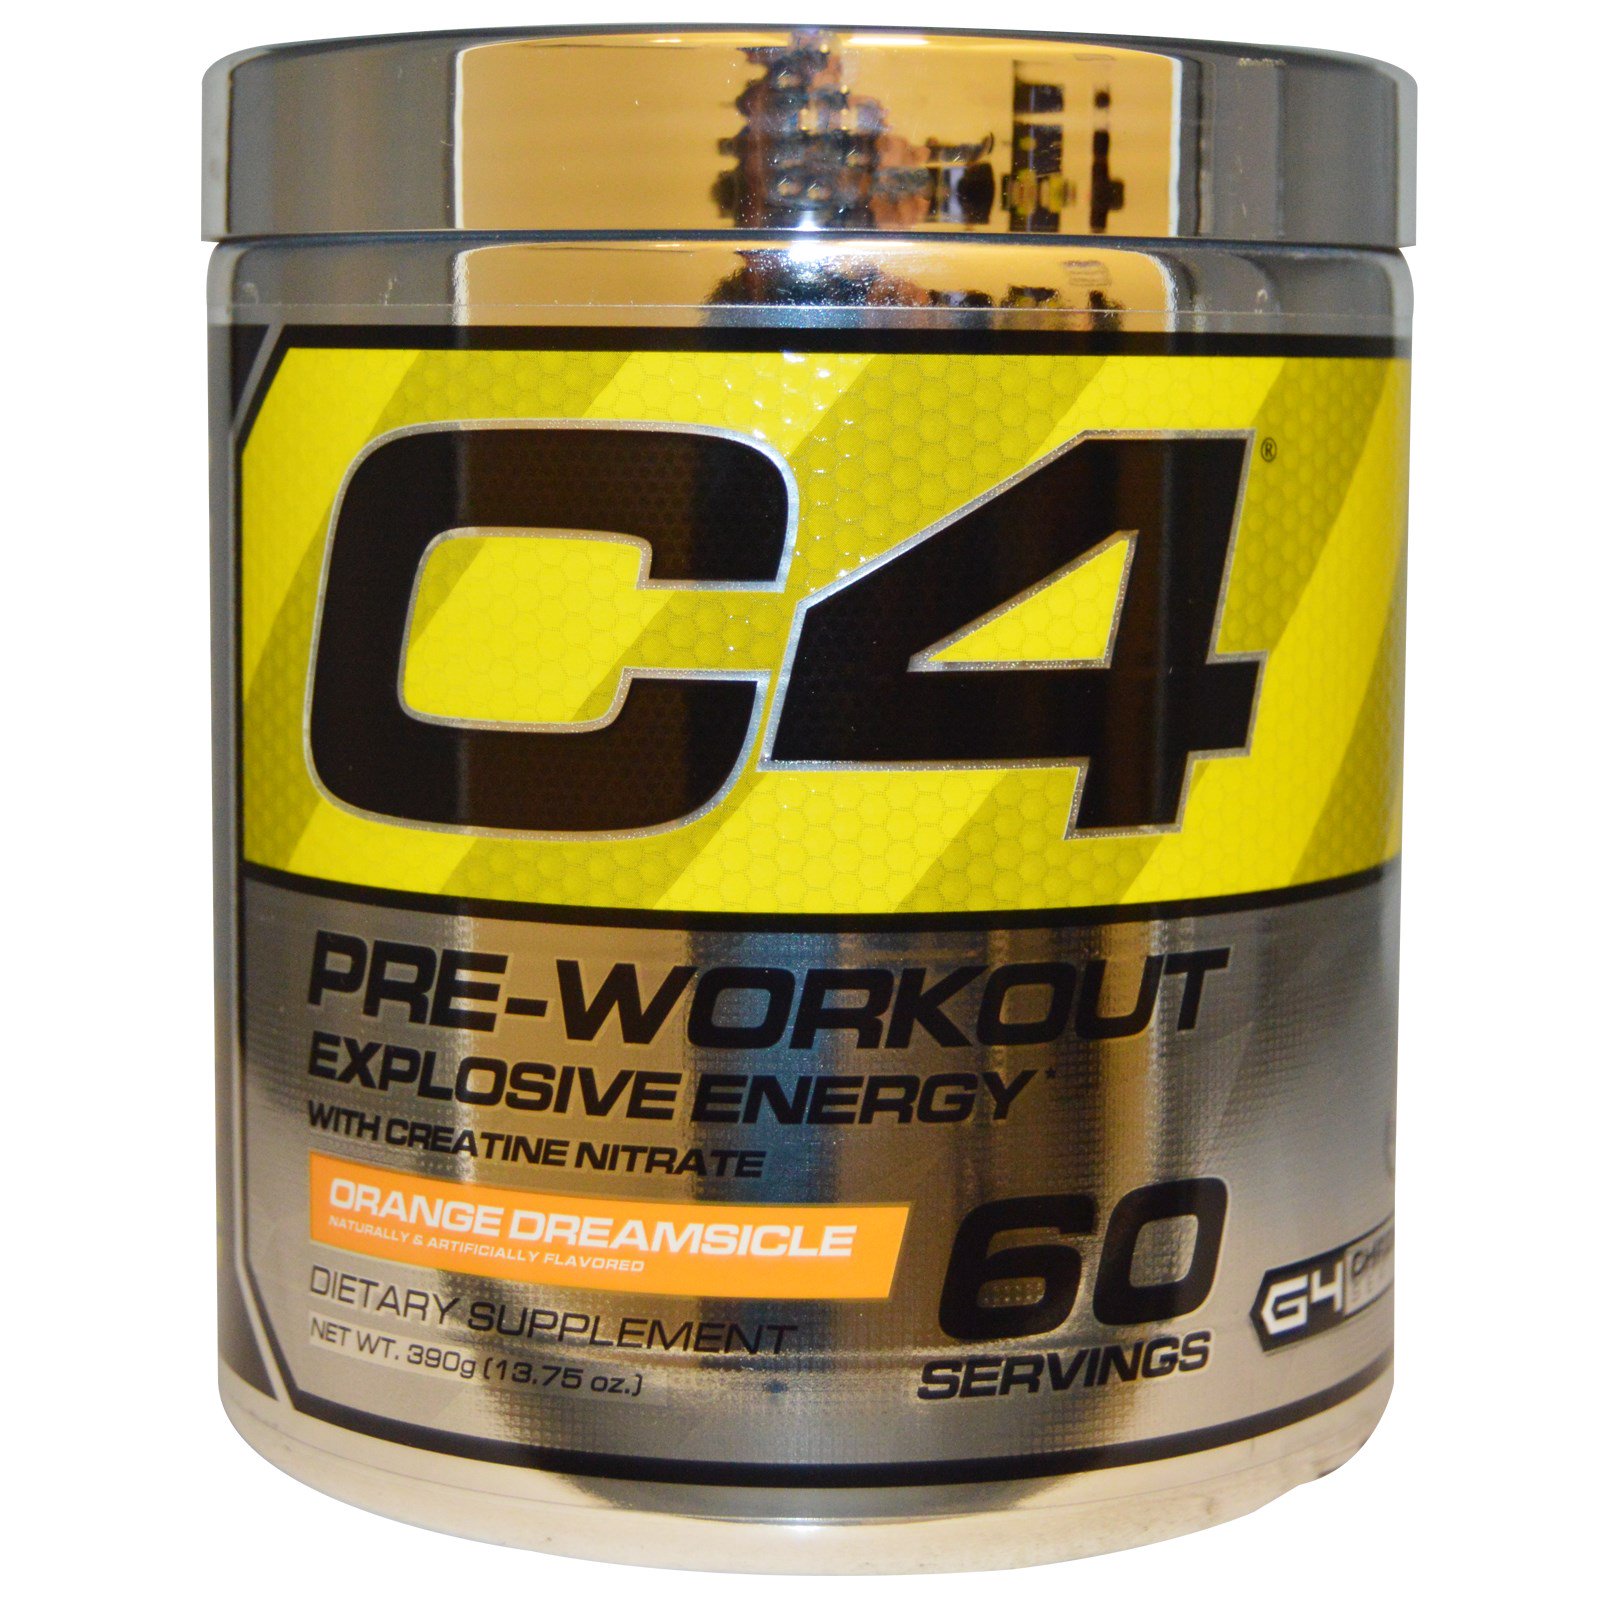 C4preworkout Review Pros Cons And Results Explained